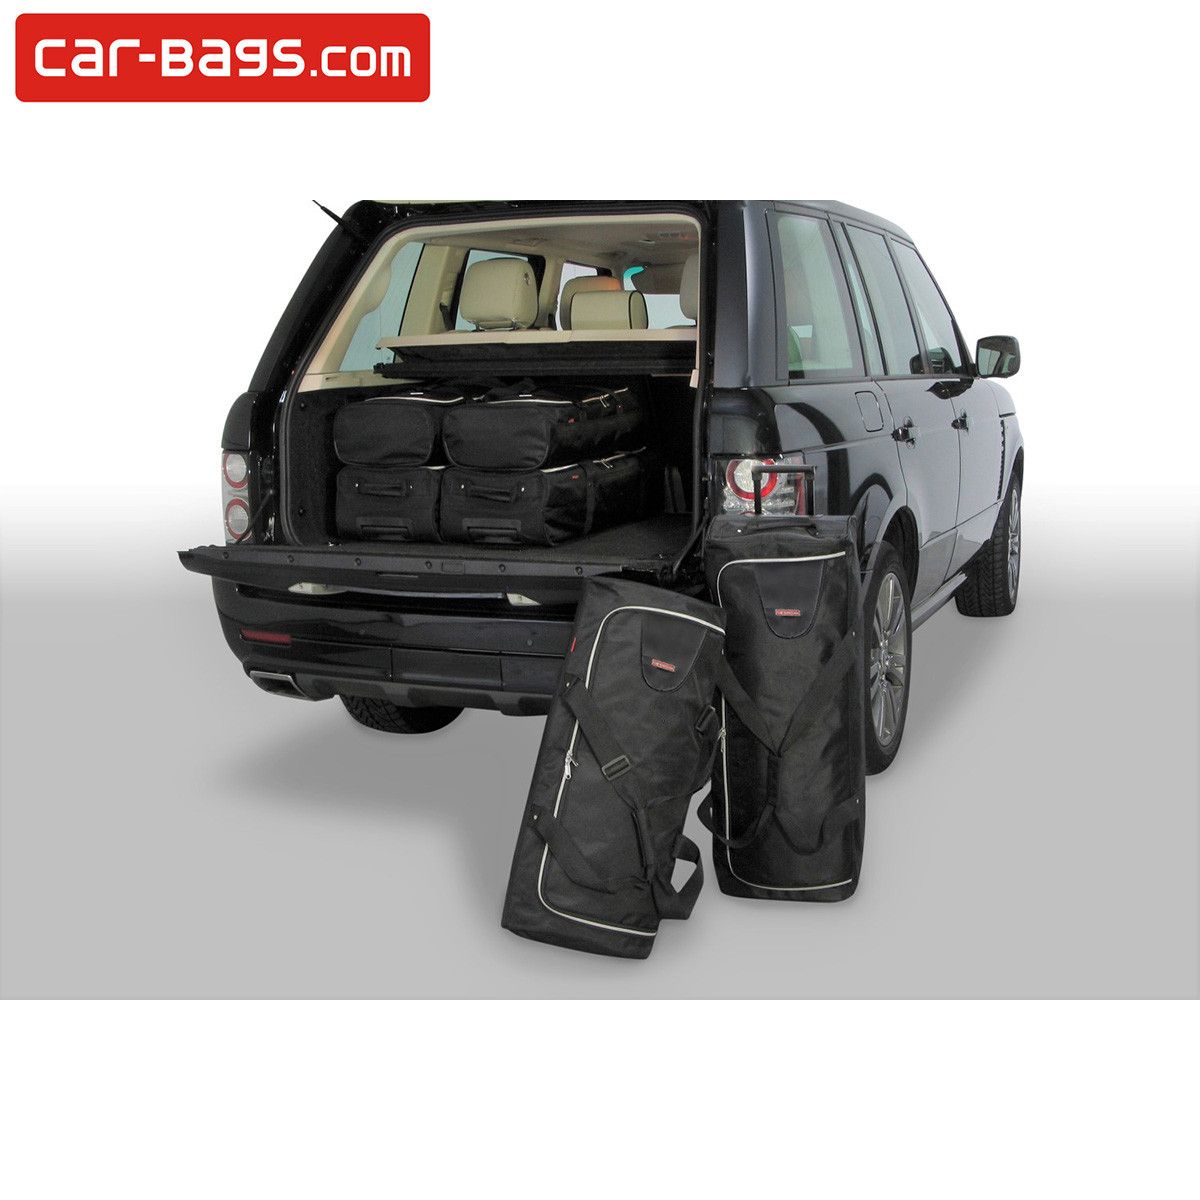 Car-Bags custom made travel bags - Premium Accessories for Your On-the-Go  Lifestyle